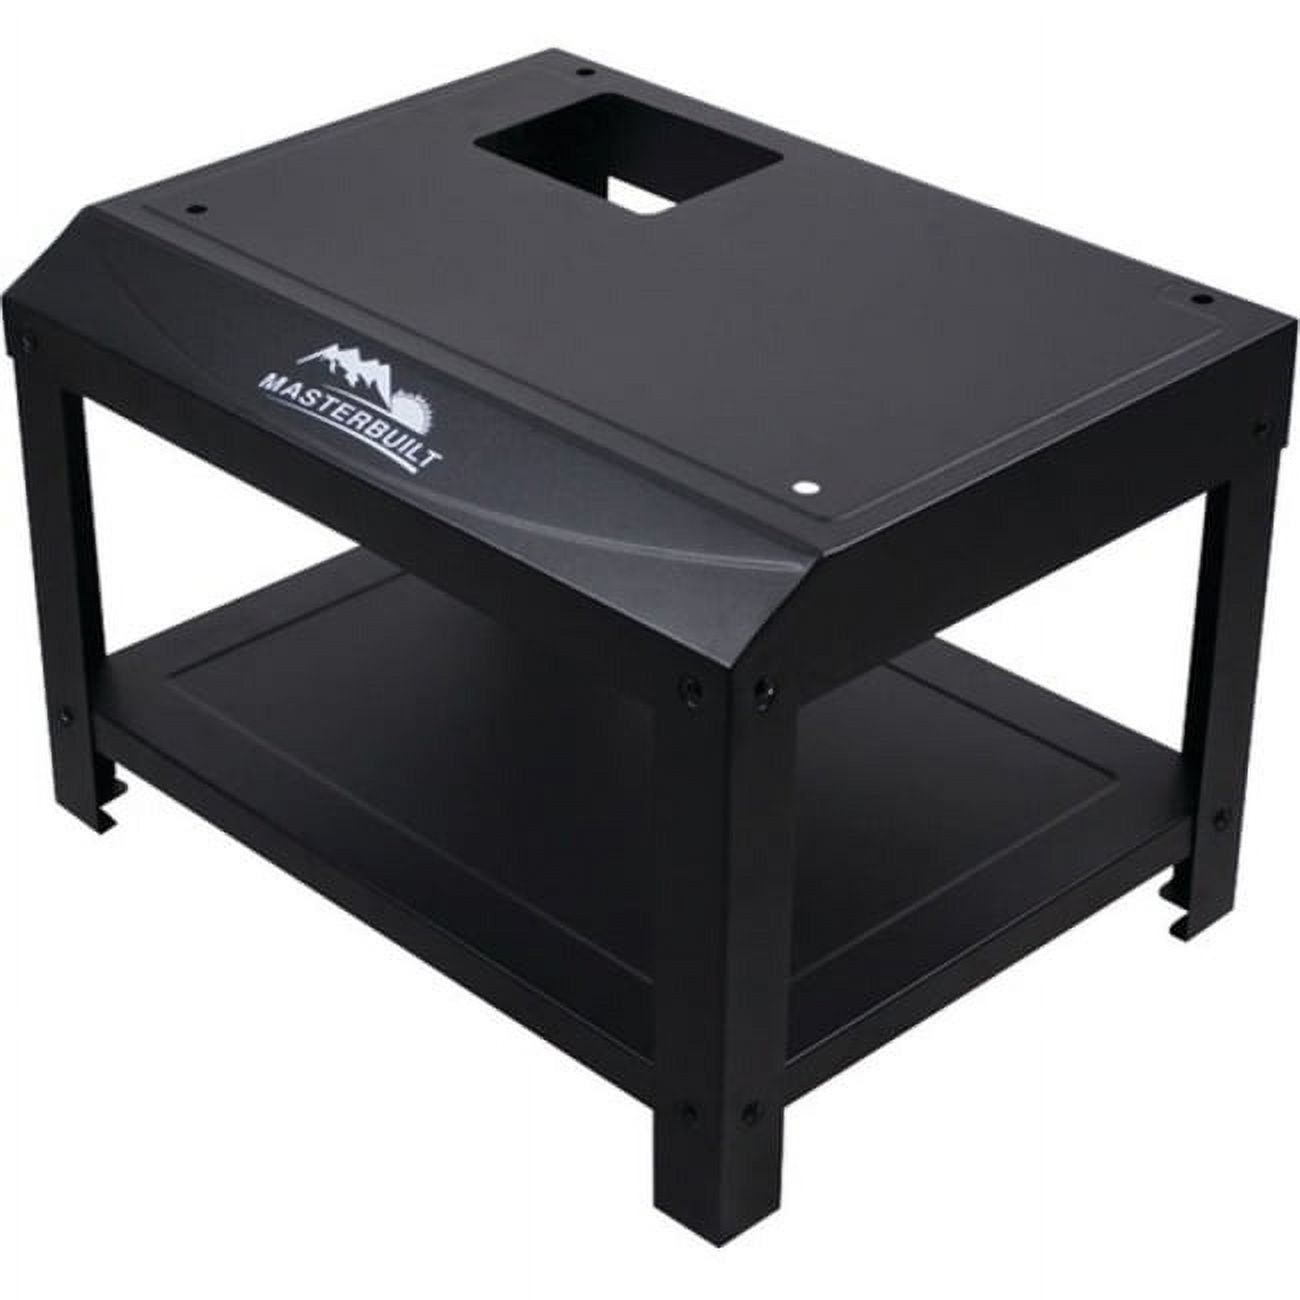 30-inch Smoker Stand - image 1 of 2